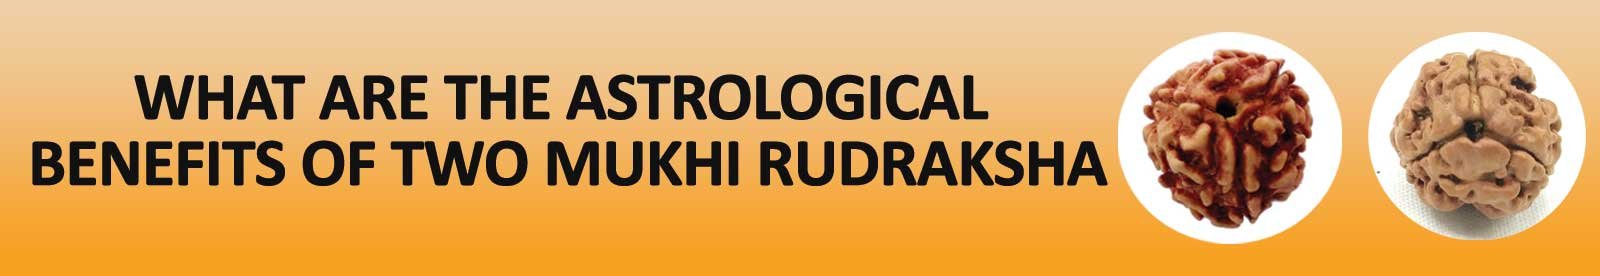 What are the Astrological Benefits of Two Mukhi Rudraksha?